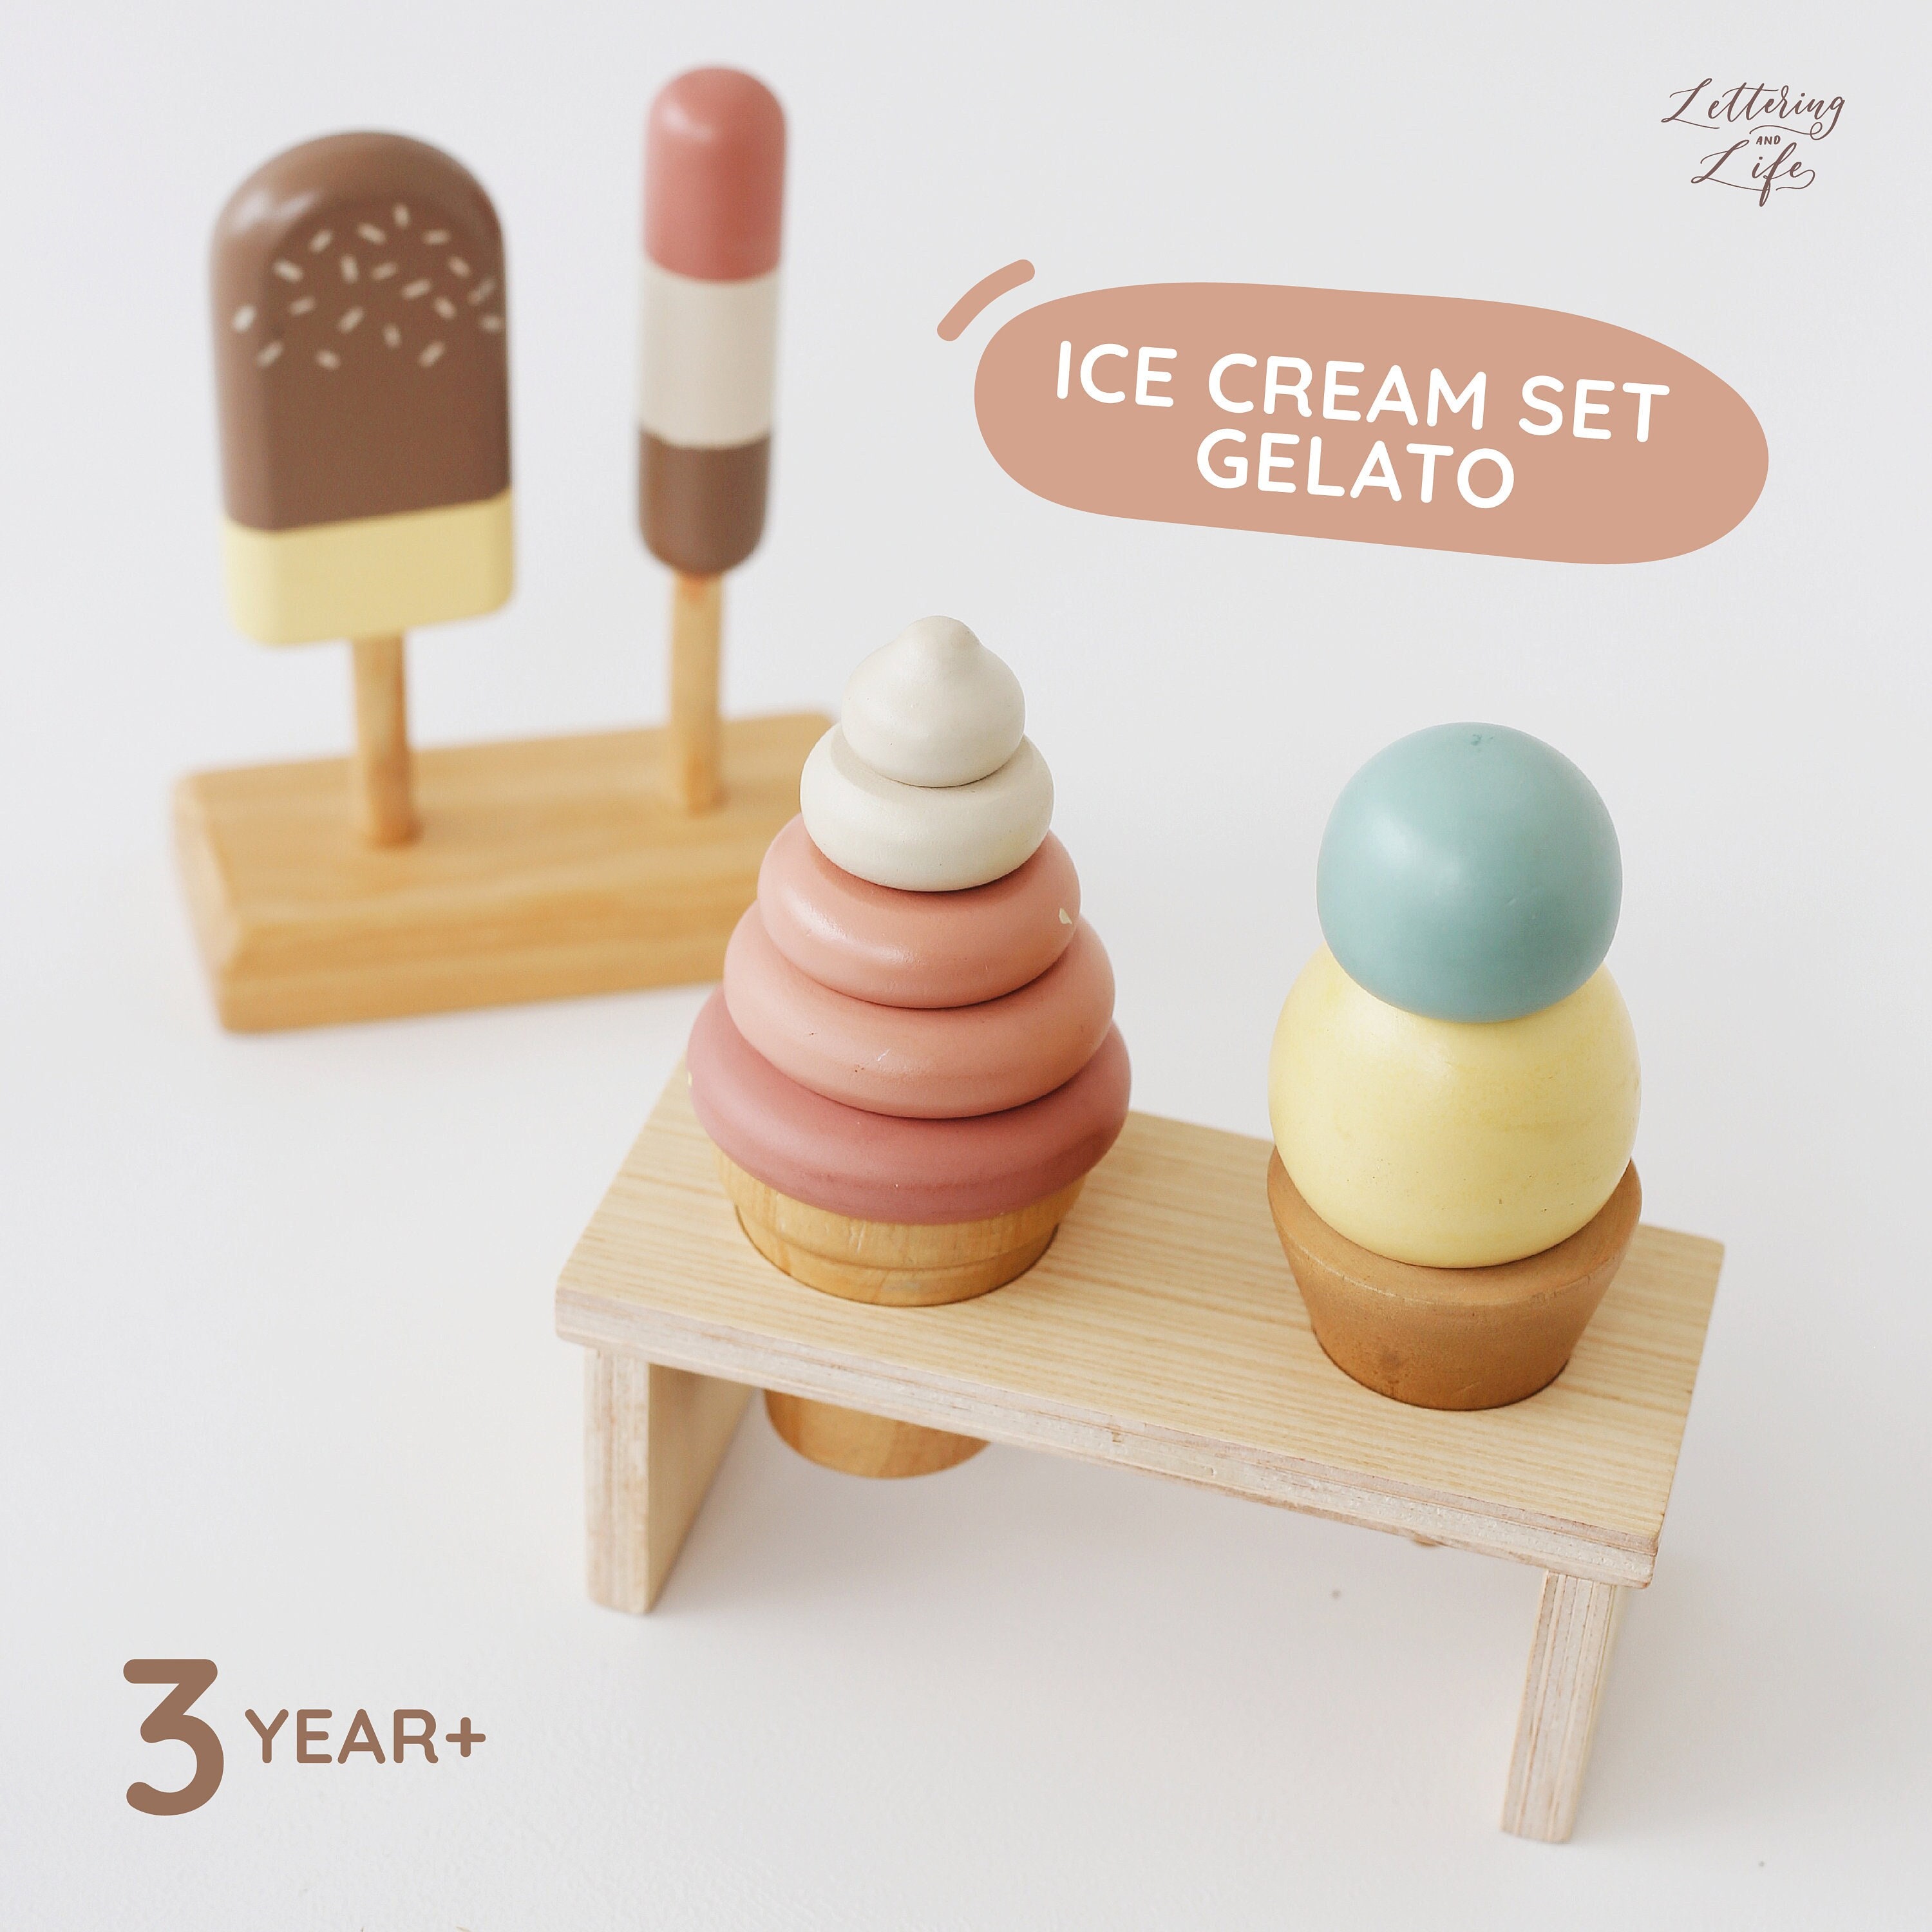 KUTOI Ice Cream Toy (16 pcs)- Play Food for Kids,Realistic Pretend Play Toy with Food Scoop and Ice Cream Cone | Ice Cream Play Set for Girls & Boys 